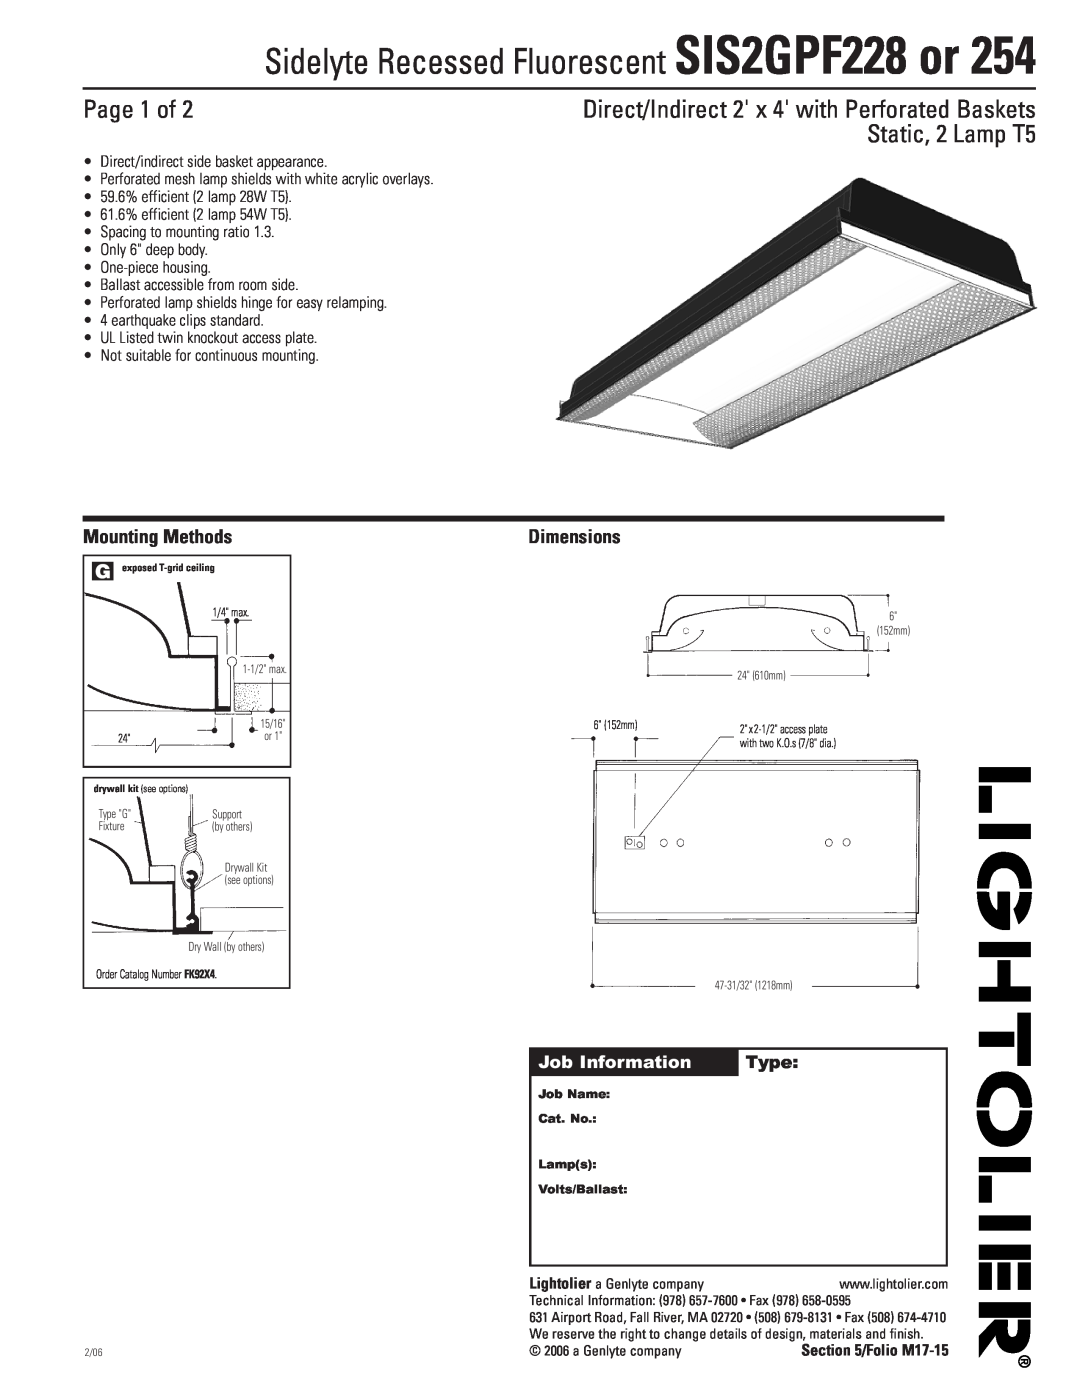 Lightolier SIS2GPF254 dimensions Page 1 of, Direct/Indirect 2 x 4 with Perforated Baskets, Static, 2 Lamp T5, Dimensions 